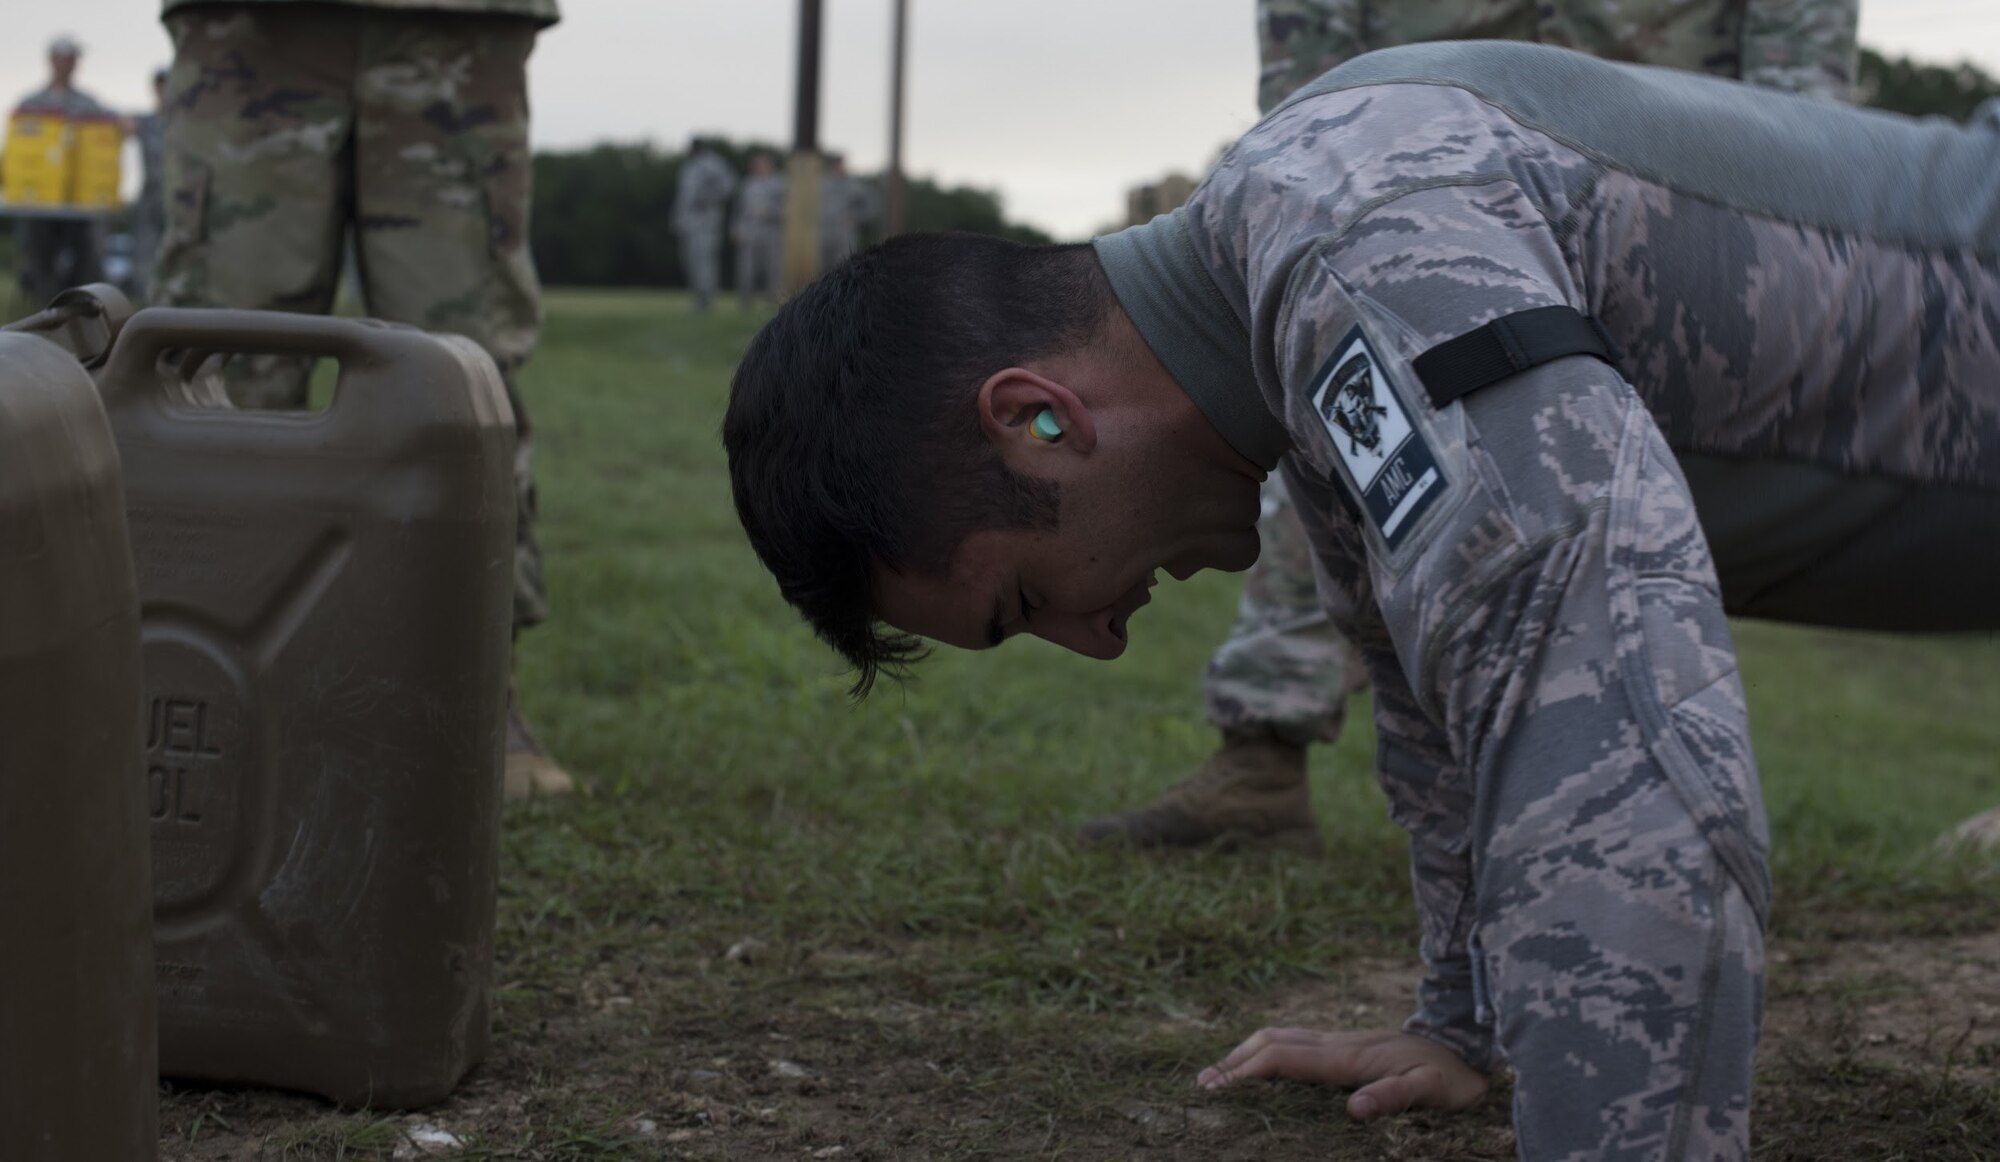 Senior Airman Anthony Hu, 6th Security Forces Squadron military working dog handler and Air Mobility Command team member, performs pushups during the 2018 Air Force Defender Challenge on Joint Base San Antonio-Camp Bullis, Texas, Sept. 13, 2018. Hu performed the last exercise of the combat endurance test on the last day of the three-day competition. (U.S. Air Force photo by Airman Ariel Owings)